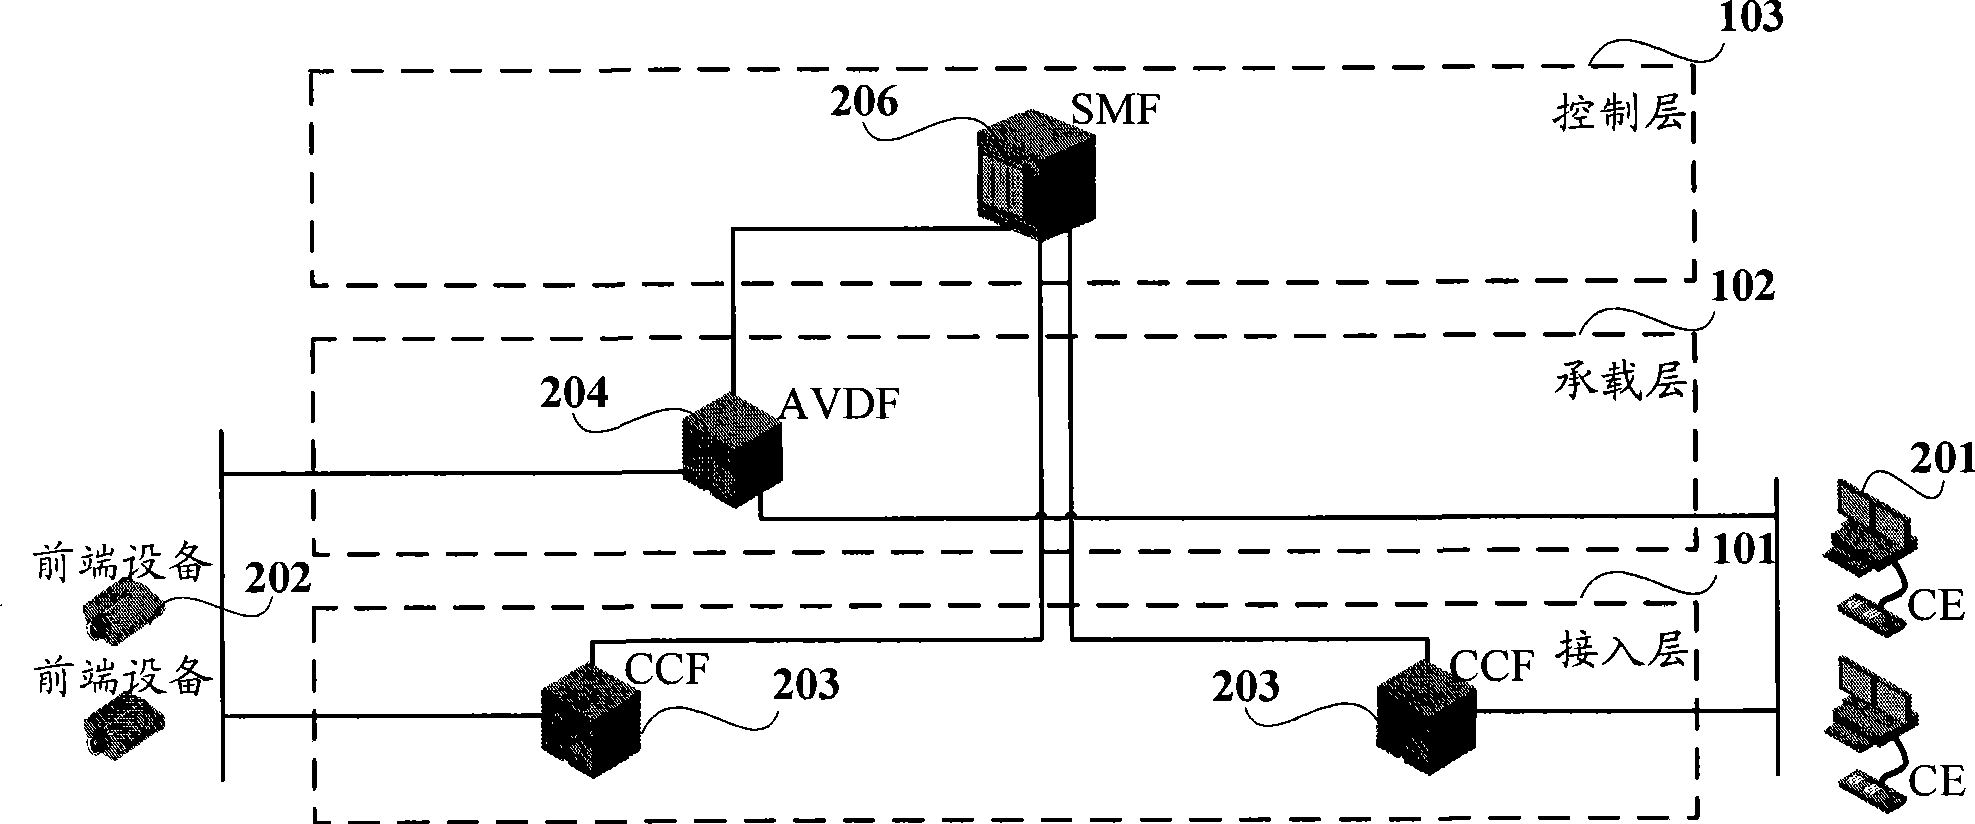 Video monitoring system and control method for establishing media stream transmission connection in the same